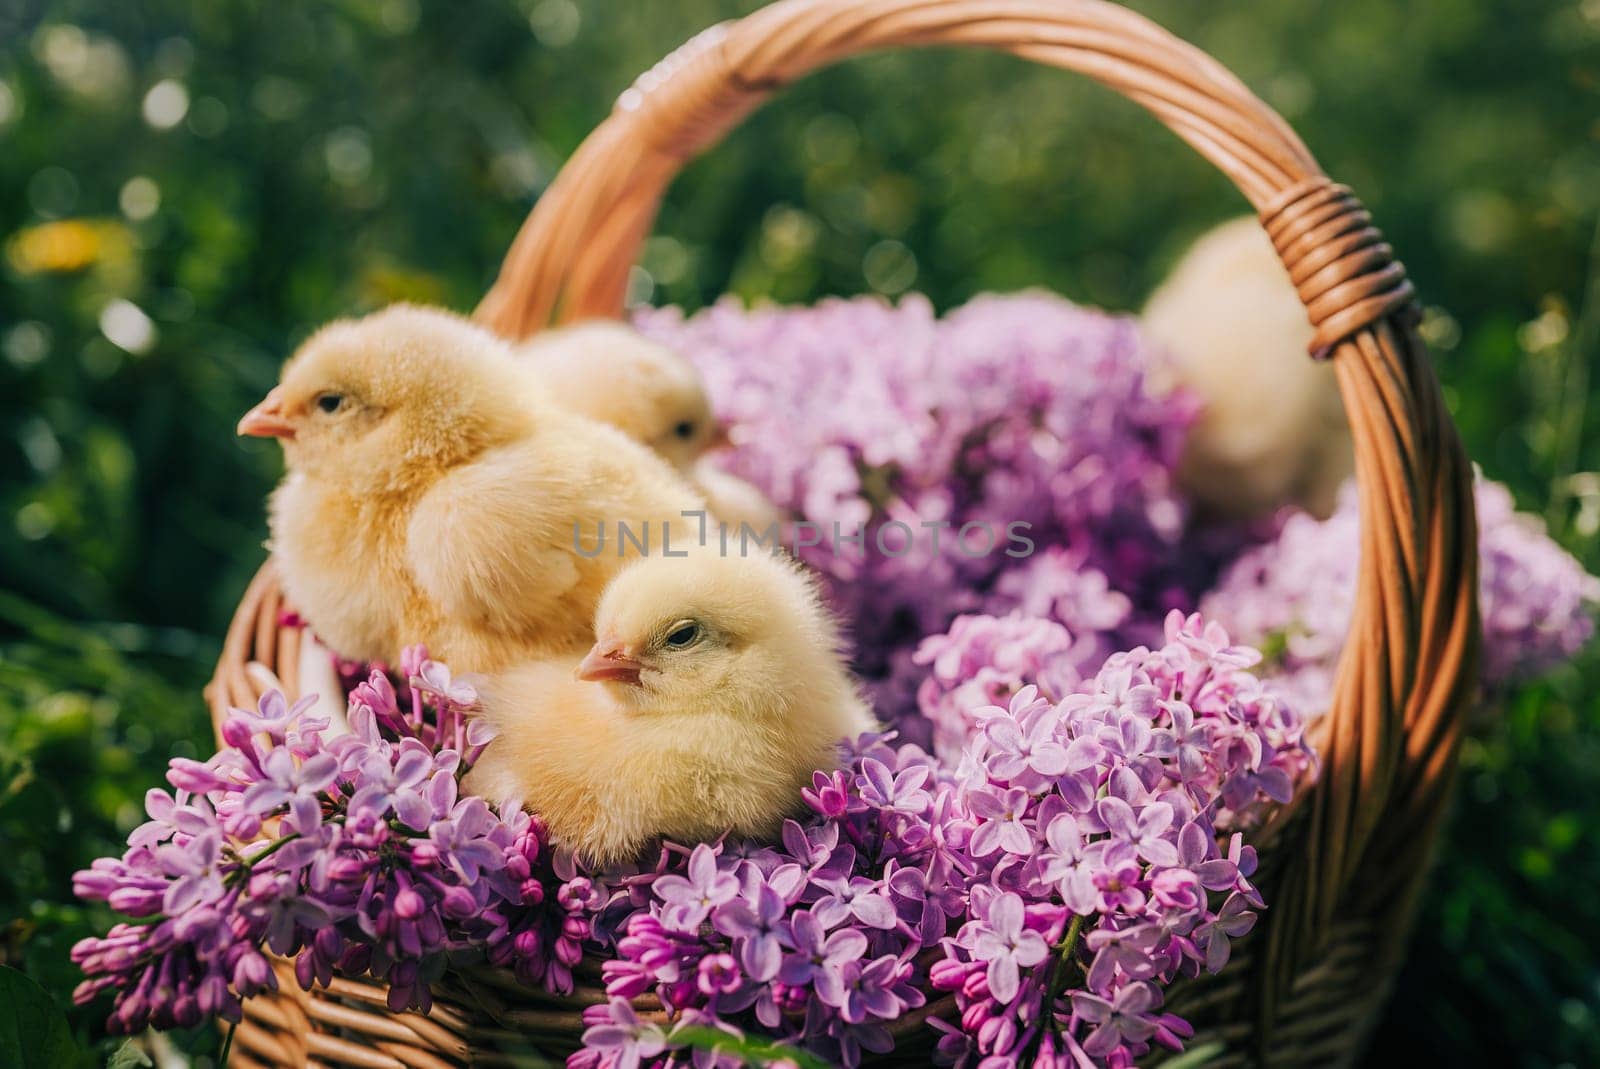 Cute little yellow chickens sitting in wicker basket with lilac flowers. Easter. by kristina_kokhanova